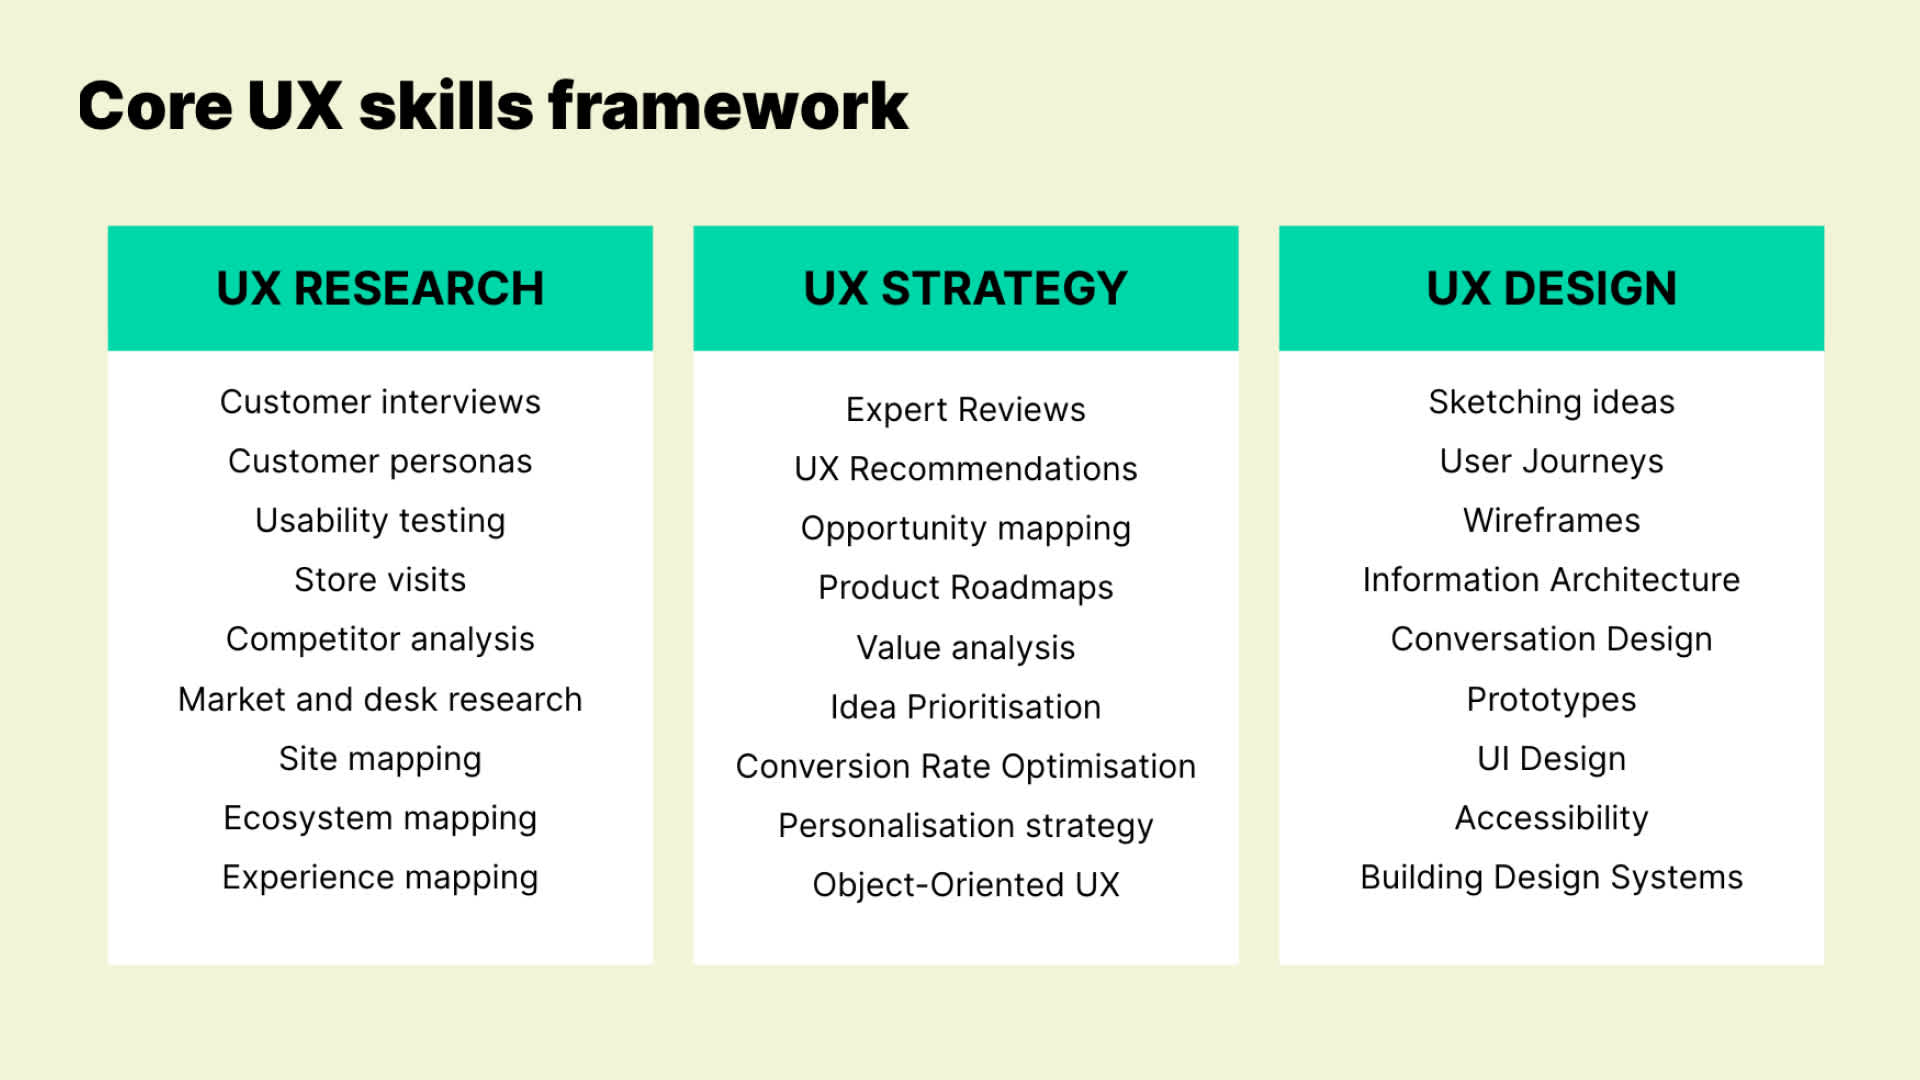 Bernadette Core UX Skills framework divided into three pillars: UX Research, UX Strategy, and UX Design, each containing specific skills and activities relevant to user experience.